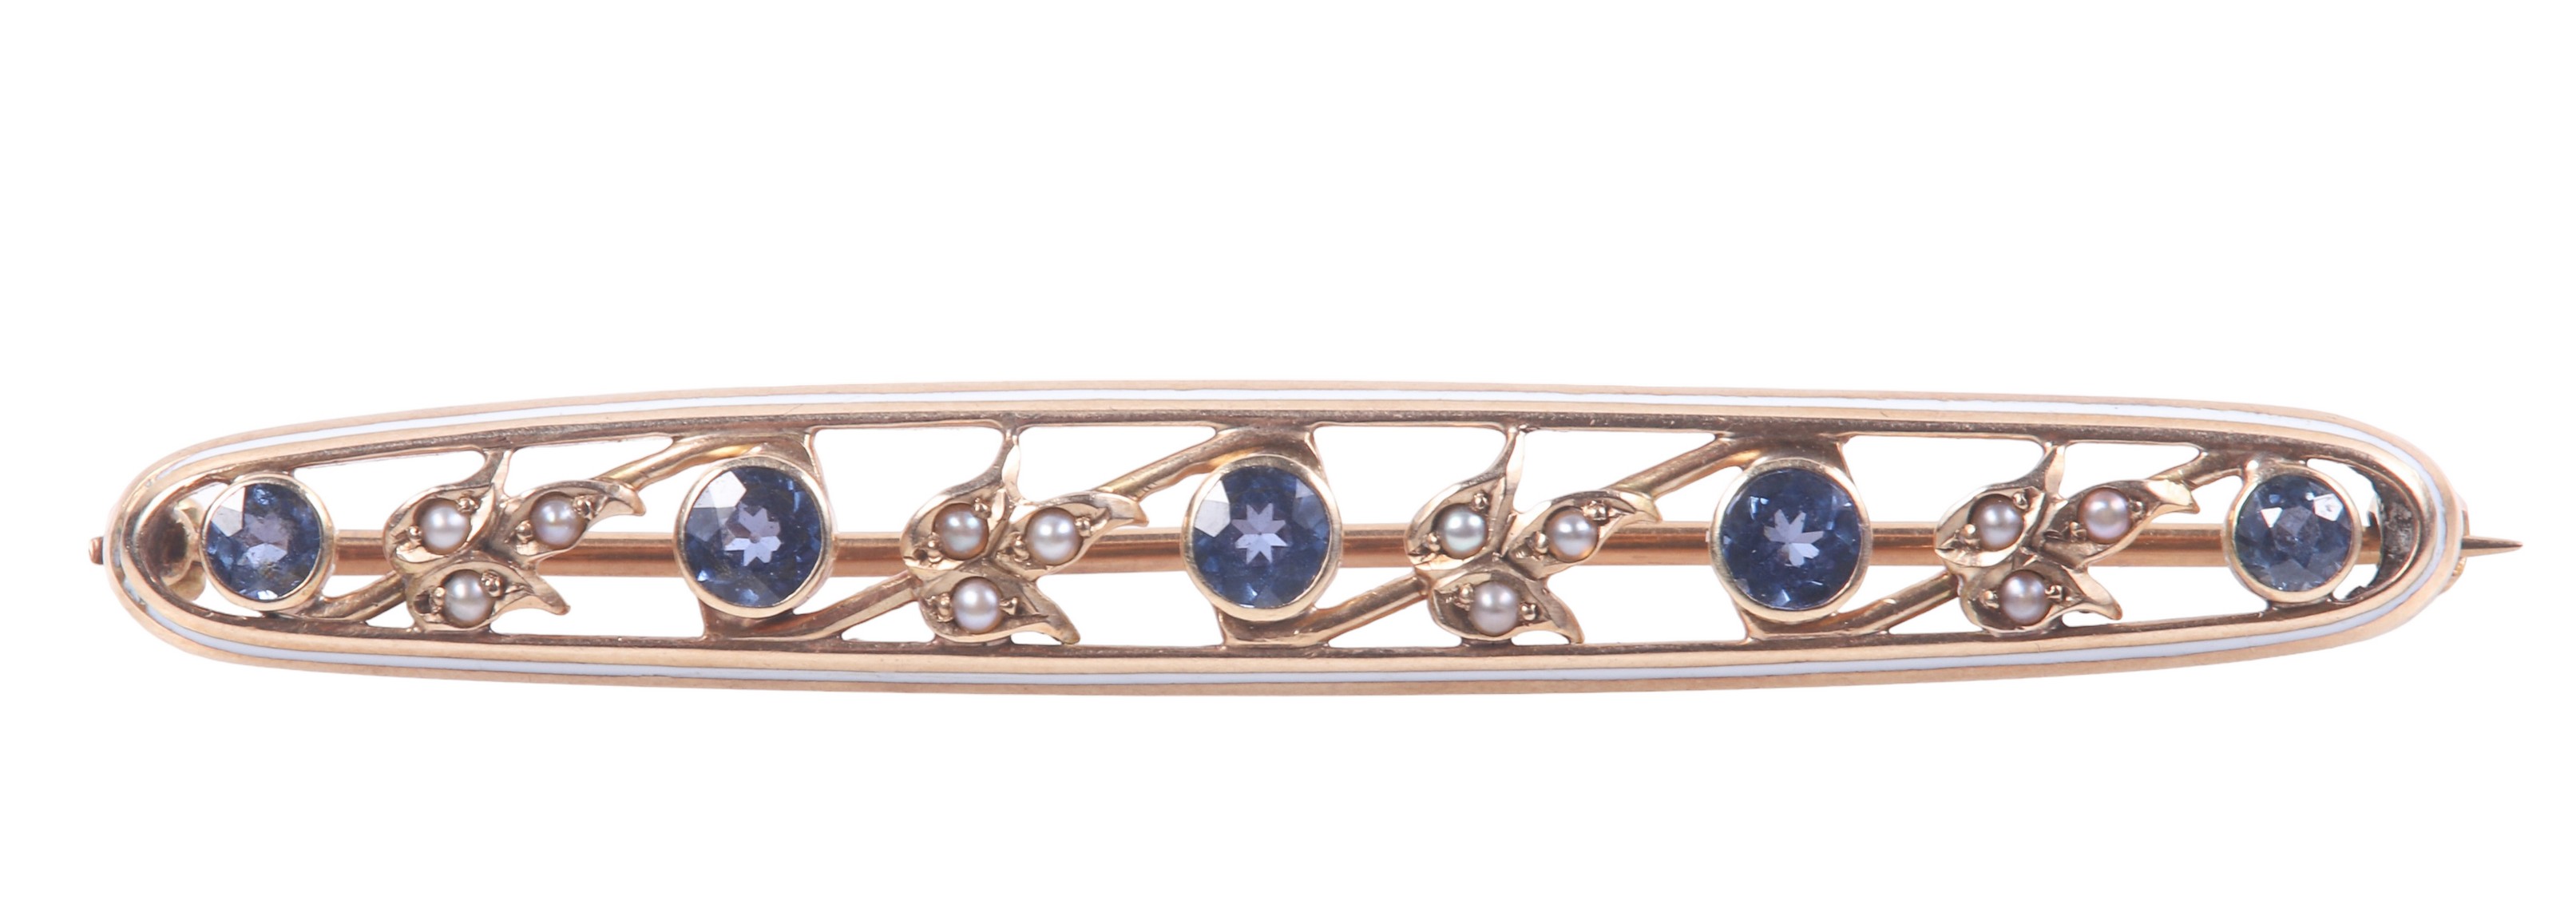 14K sapphire and seed pearl brooch  2e108b